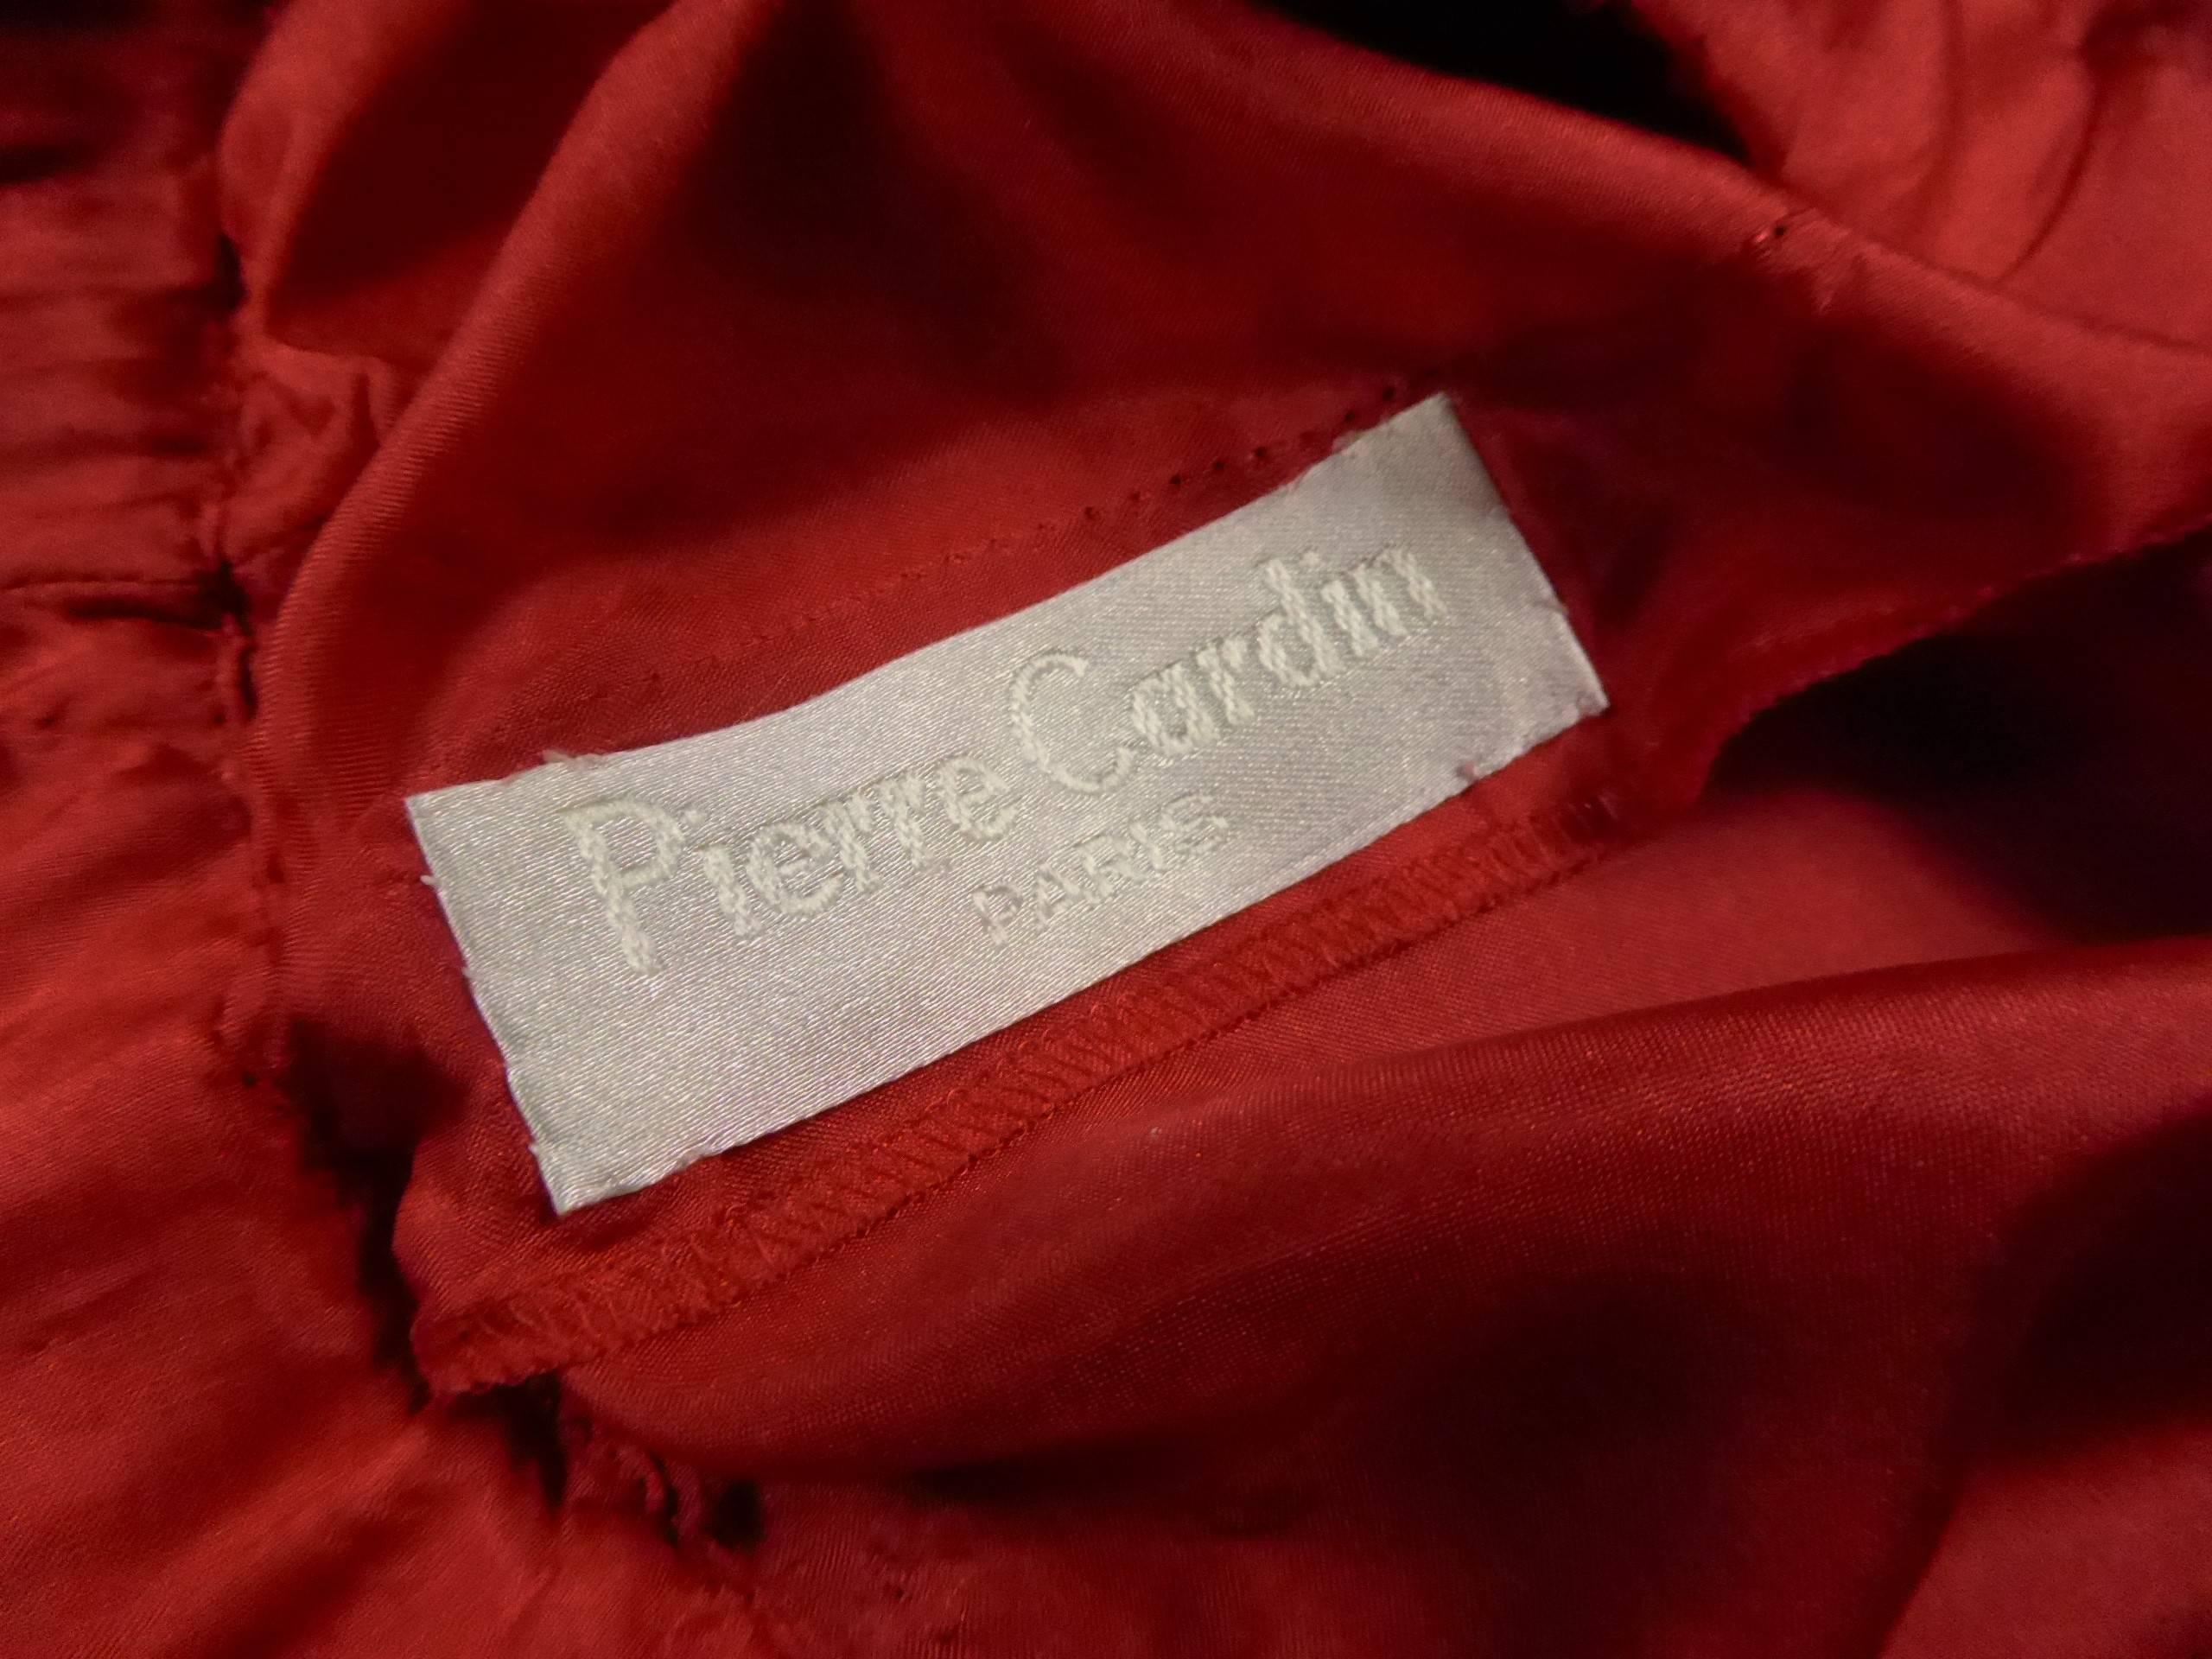 Early 1980.

France.

Pearly red dress from Pierre Cardin, in polyester satin, inner lining in red viscose. Under skirt held by two black presses inside the dress. Large three quarter batwing sleeves. Split on top of arms and closed by a small knot